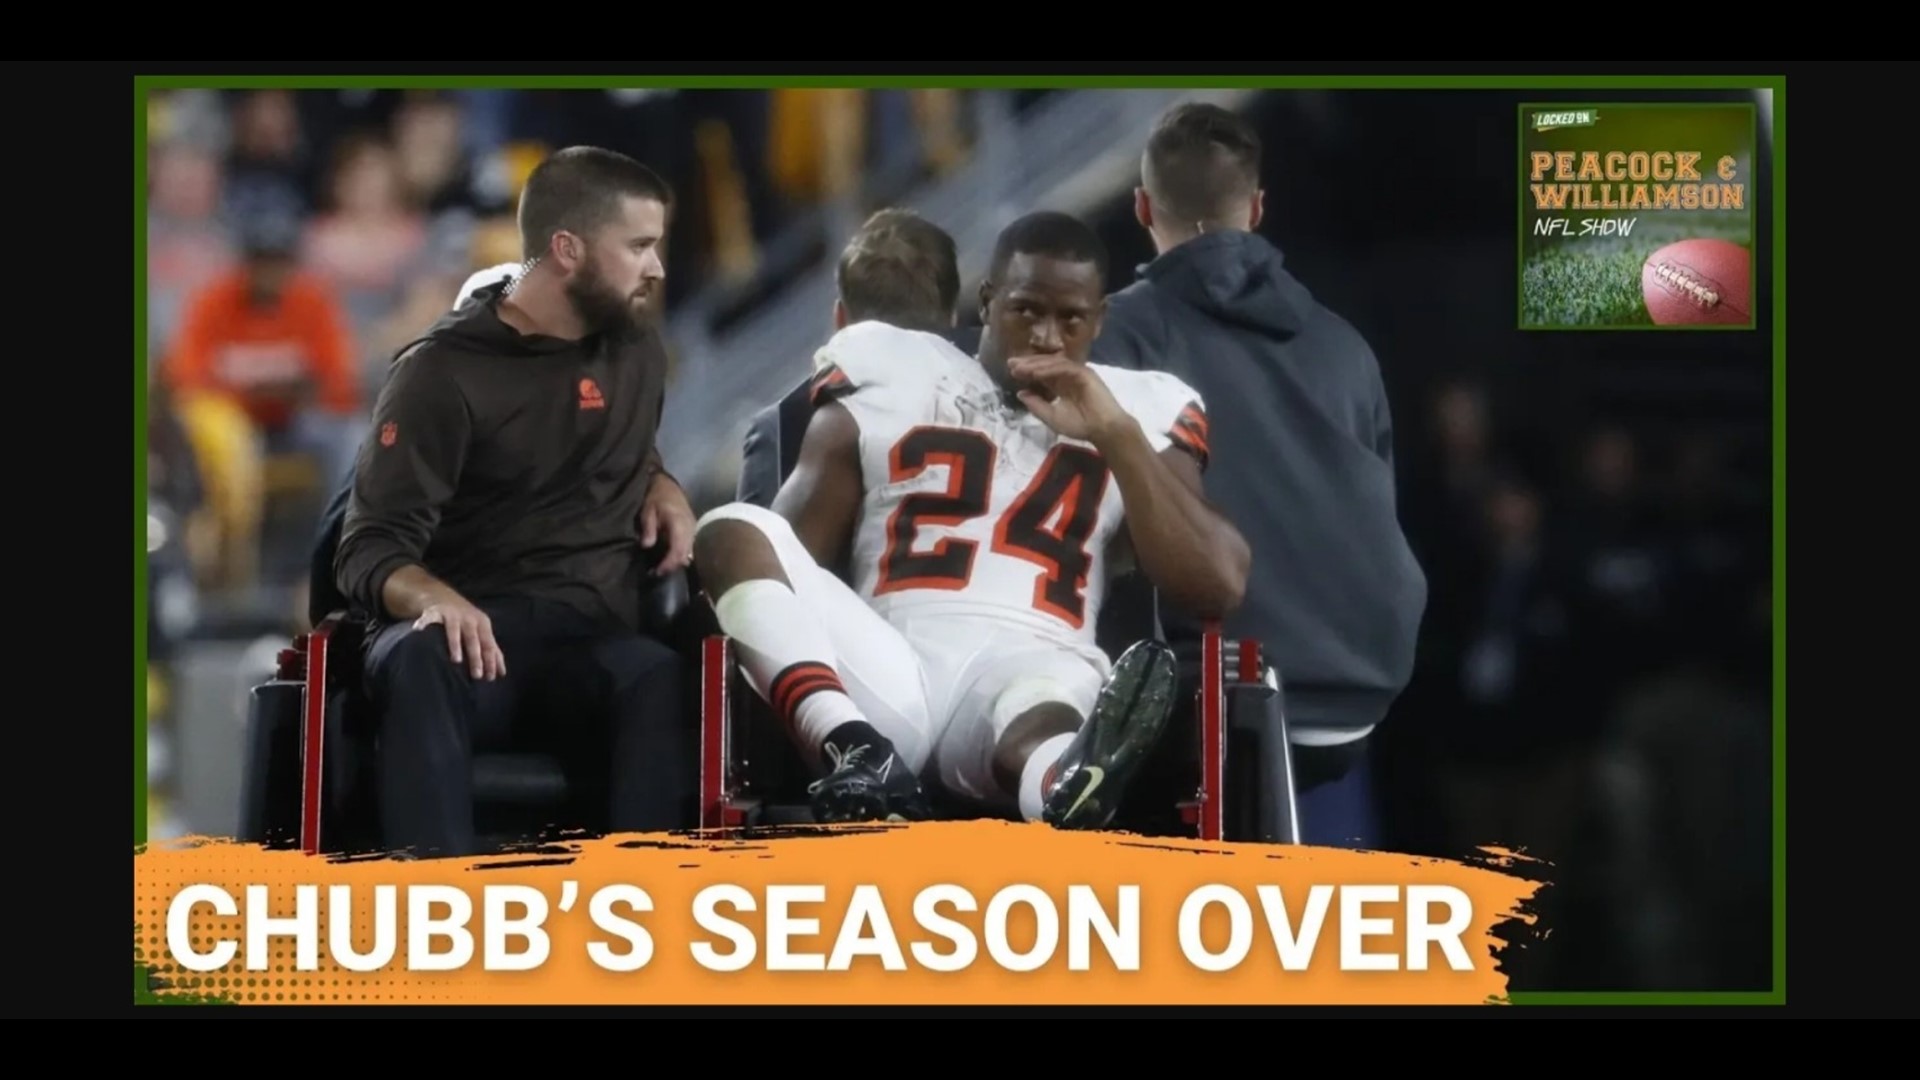 Unfortunately the season looks over for Cleveland Browns running back Nick Chubb. That with underwhelming performances from quarterback Deshaun Watson.